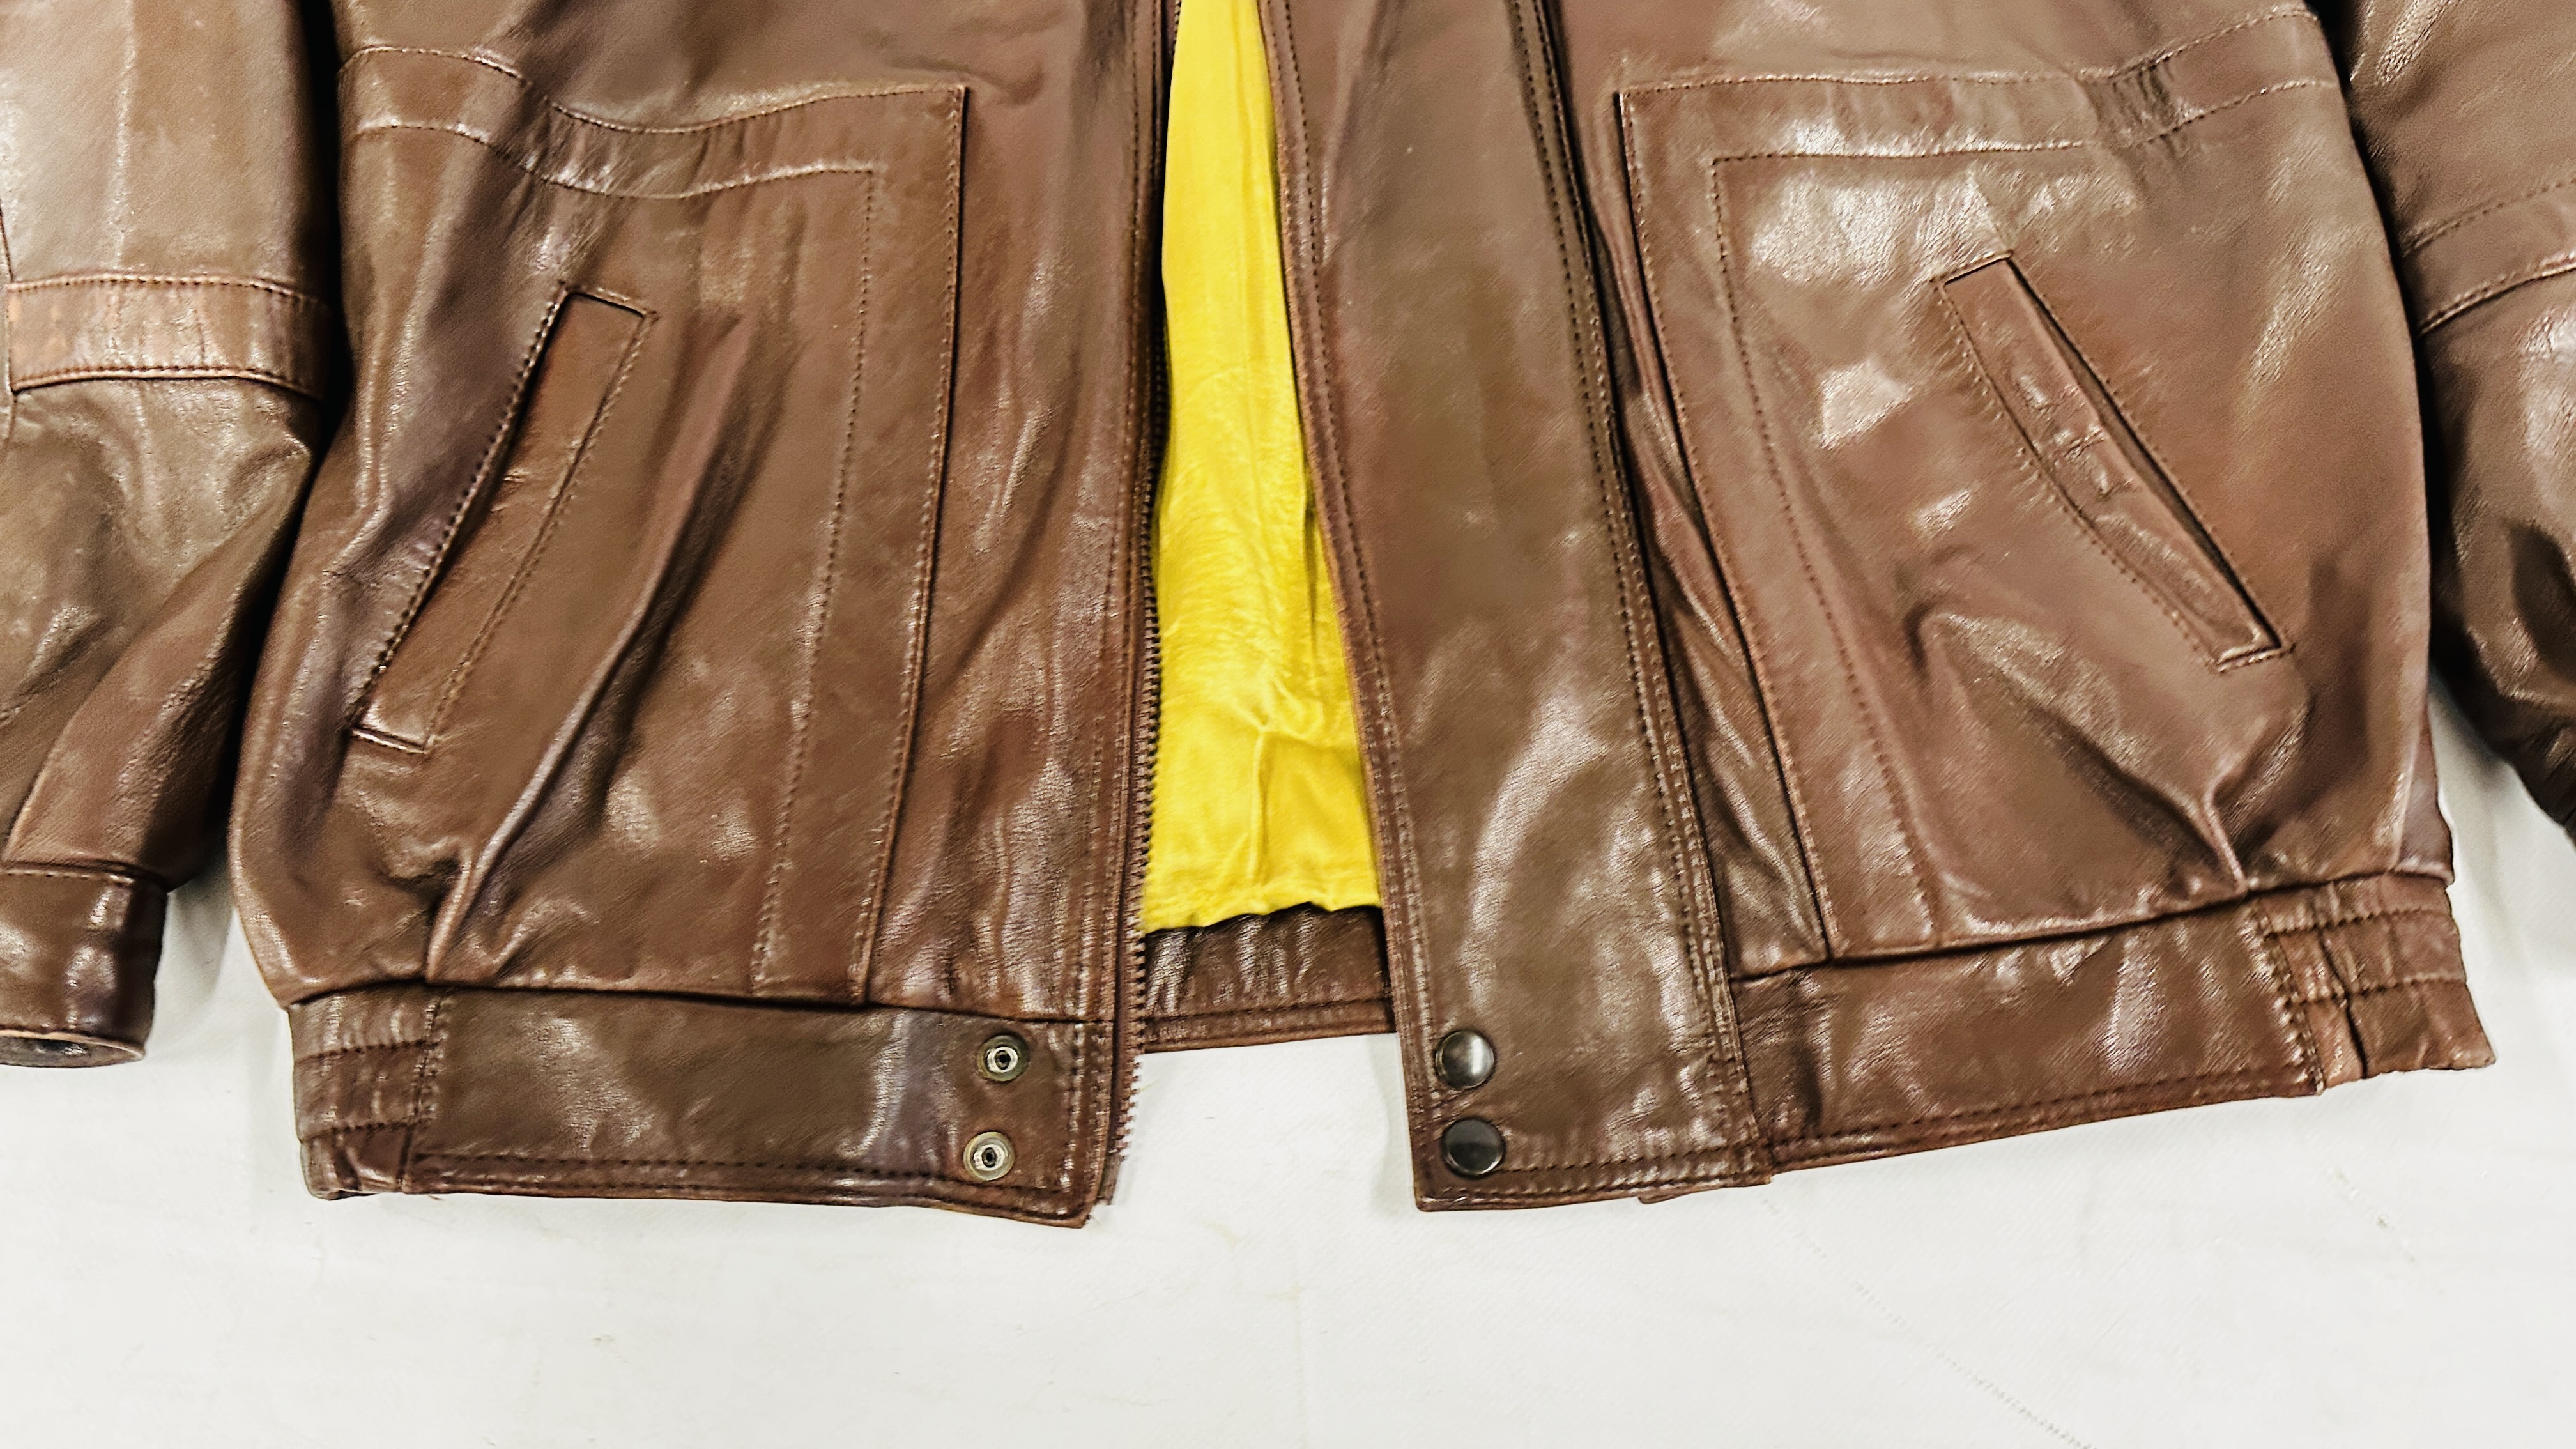 A GENTS BROWN LEATHER JACKET MARKED "SARDAR" SIZE L. - Image 4 of 9